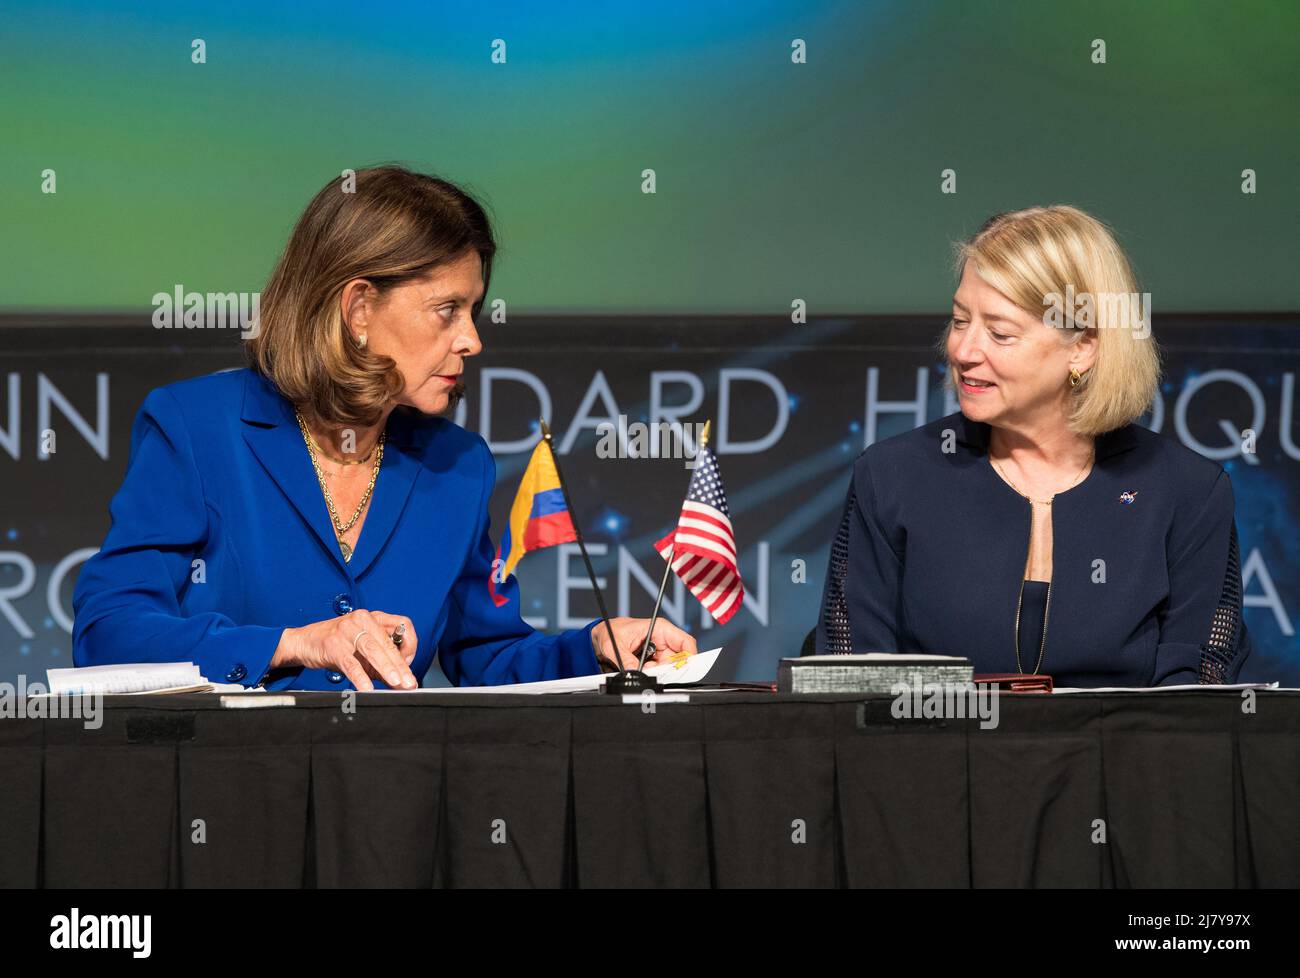 Washington, United States Of America. 10th May, 2022. Washington, United States of America. 10 May, 2022. Colombian Vice President and Foreign Minister, Marta Lucia Ramirez, left, and NASA Deputy Administrator Pam Melroy, sign the Artemis Accords, at the NASA Headquarters Mary W. Jackson Building, May 10, 2022 in Washington, DC, USA. Colombia is the nineteenth country to sign the Artemis Accords, which establish a practical set of principles to guide space exploration cooperation among nations participating in the NASA Artemis program. Credit: Aubrey Gemignani/NASA/Alamy Live News Stock Photo